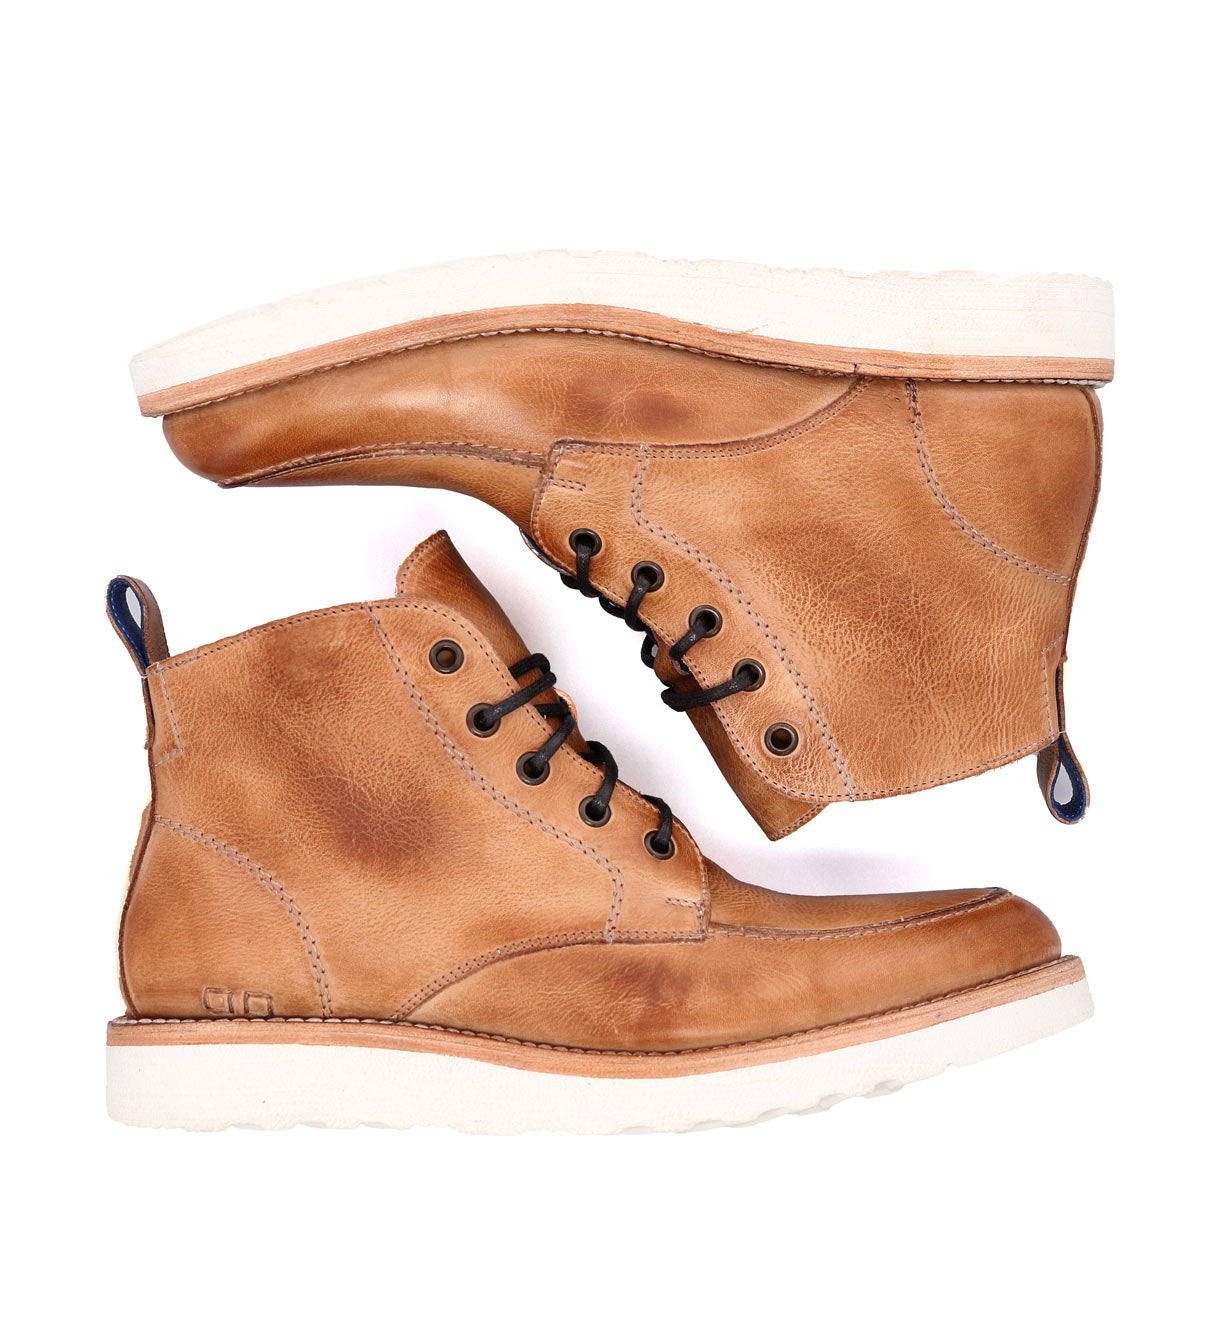 A pair of tan men's leather Lincoln boots with laces, viewed from above, isolated on a white background. (Bed Stu)